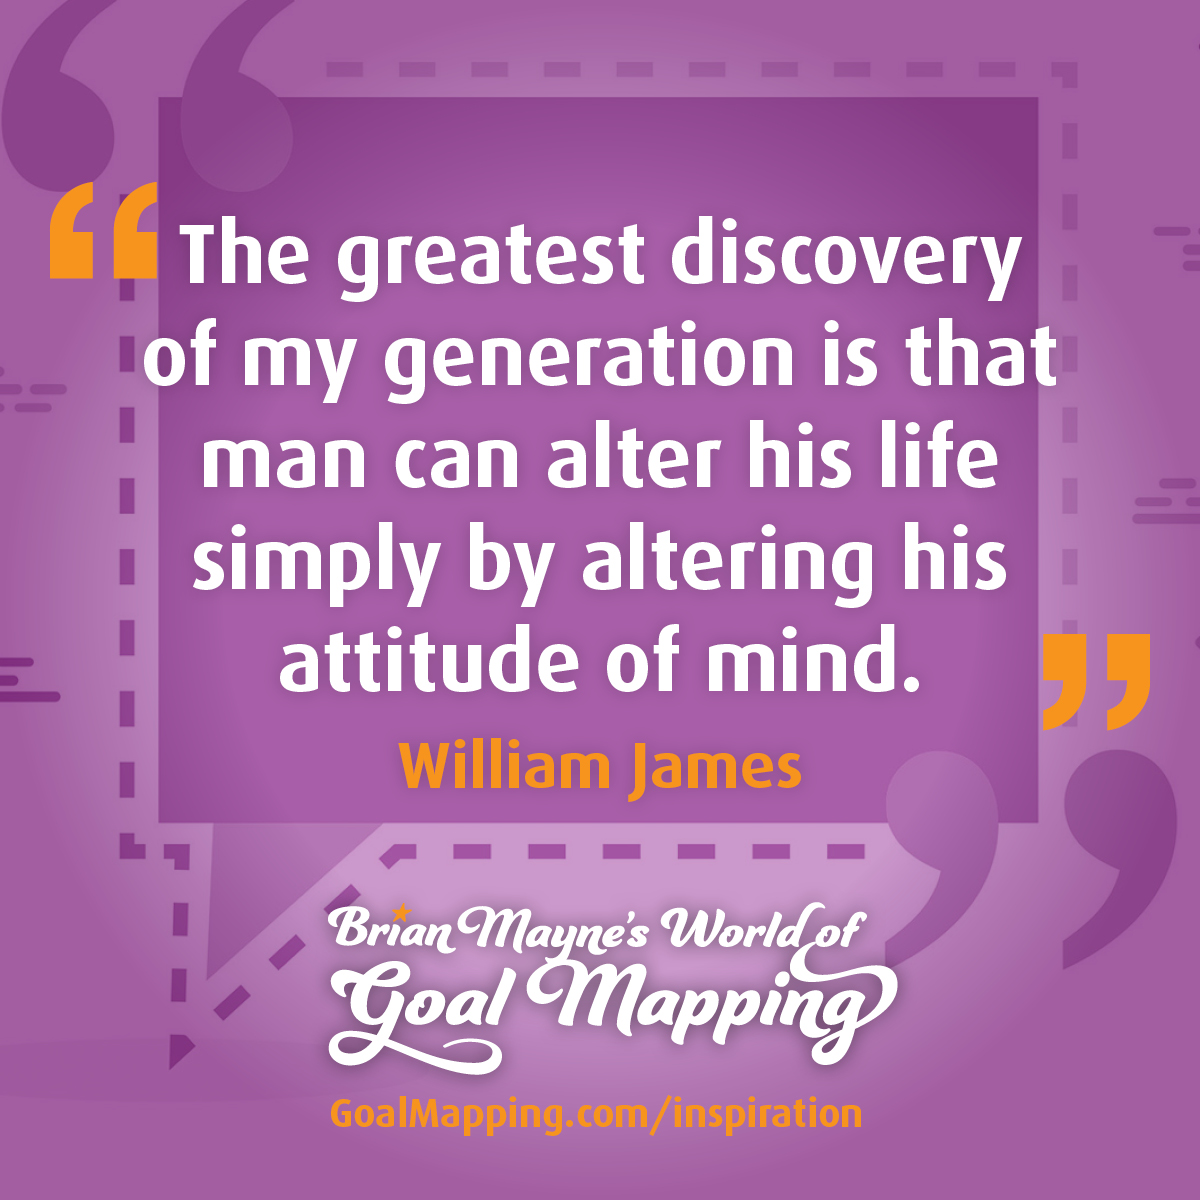 "The greatest discovery of my generation is that man can alter his life simply by altering his attitude of mind." William James